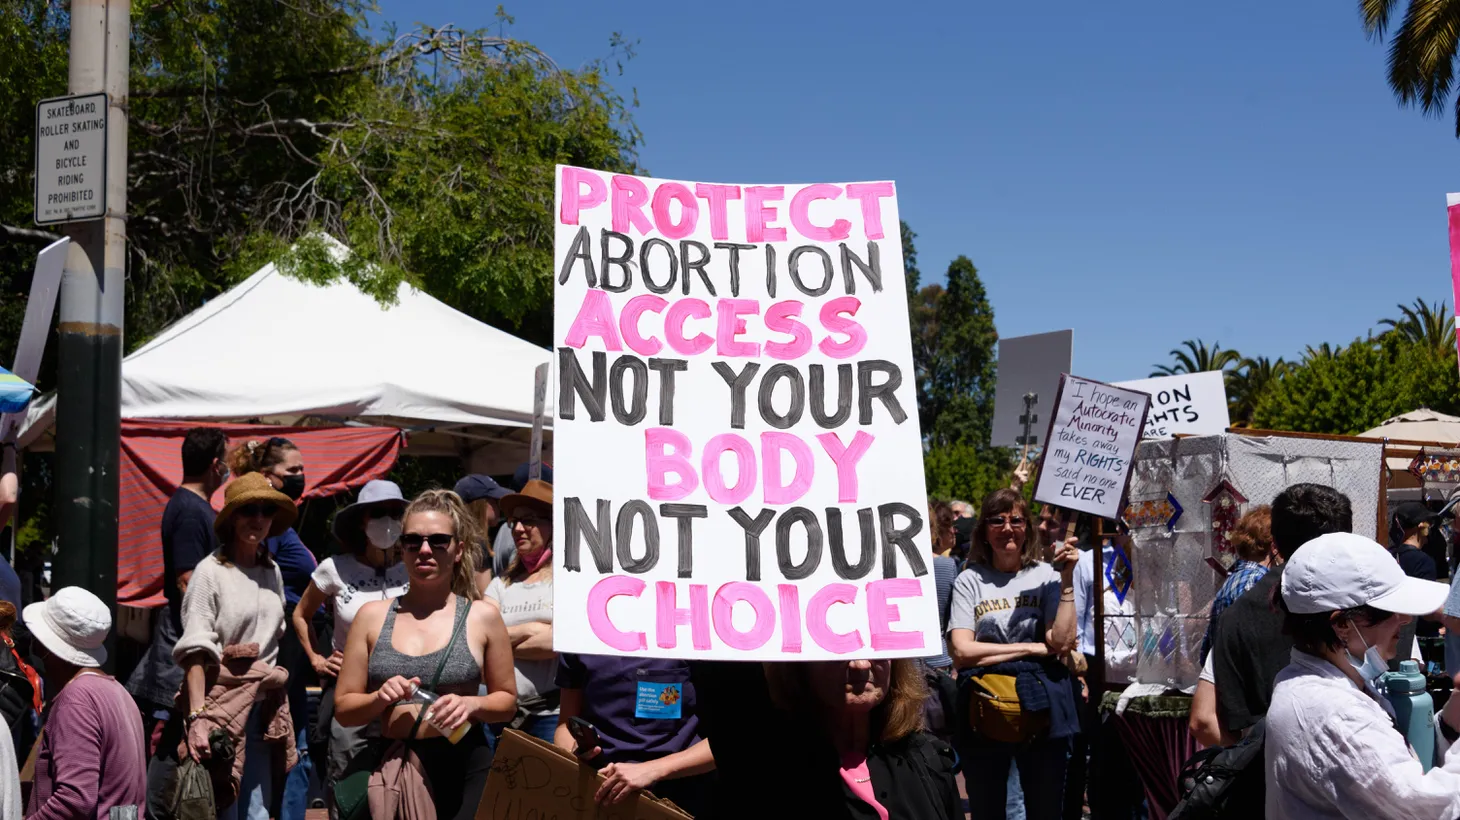 An activist carries a sign that says “protect abortion access, not your body, not your choice,” in San Francisco, California, May 14, 2022.